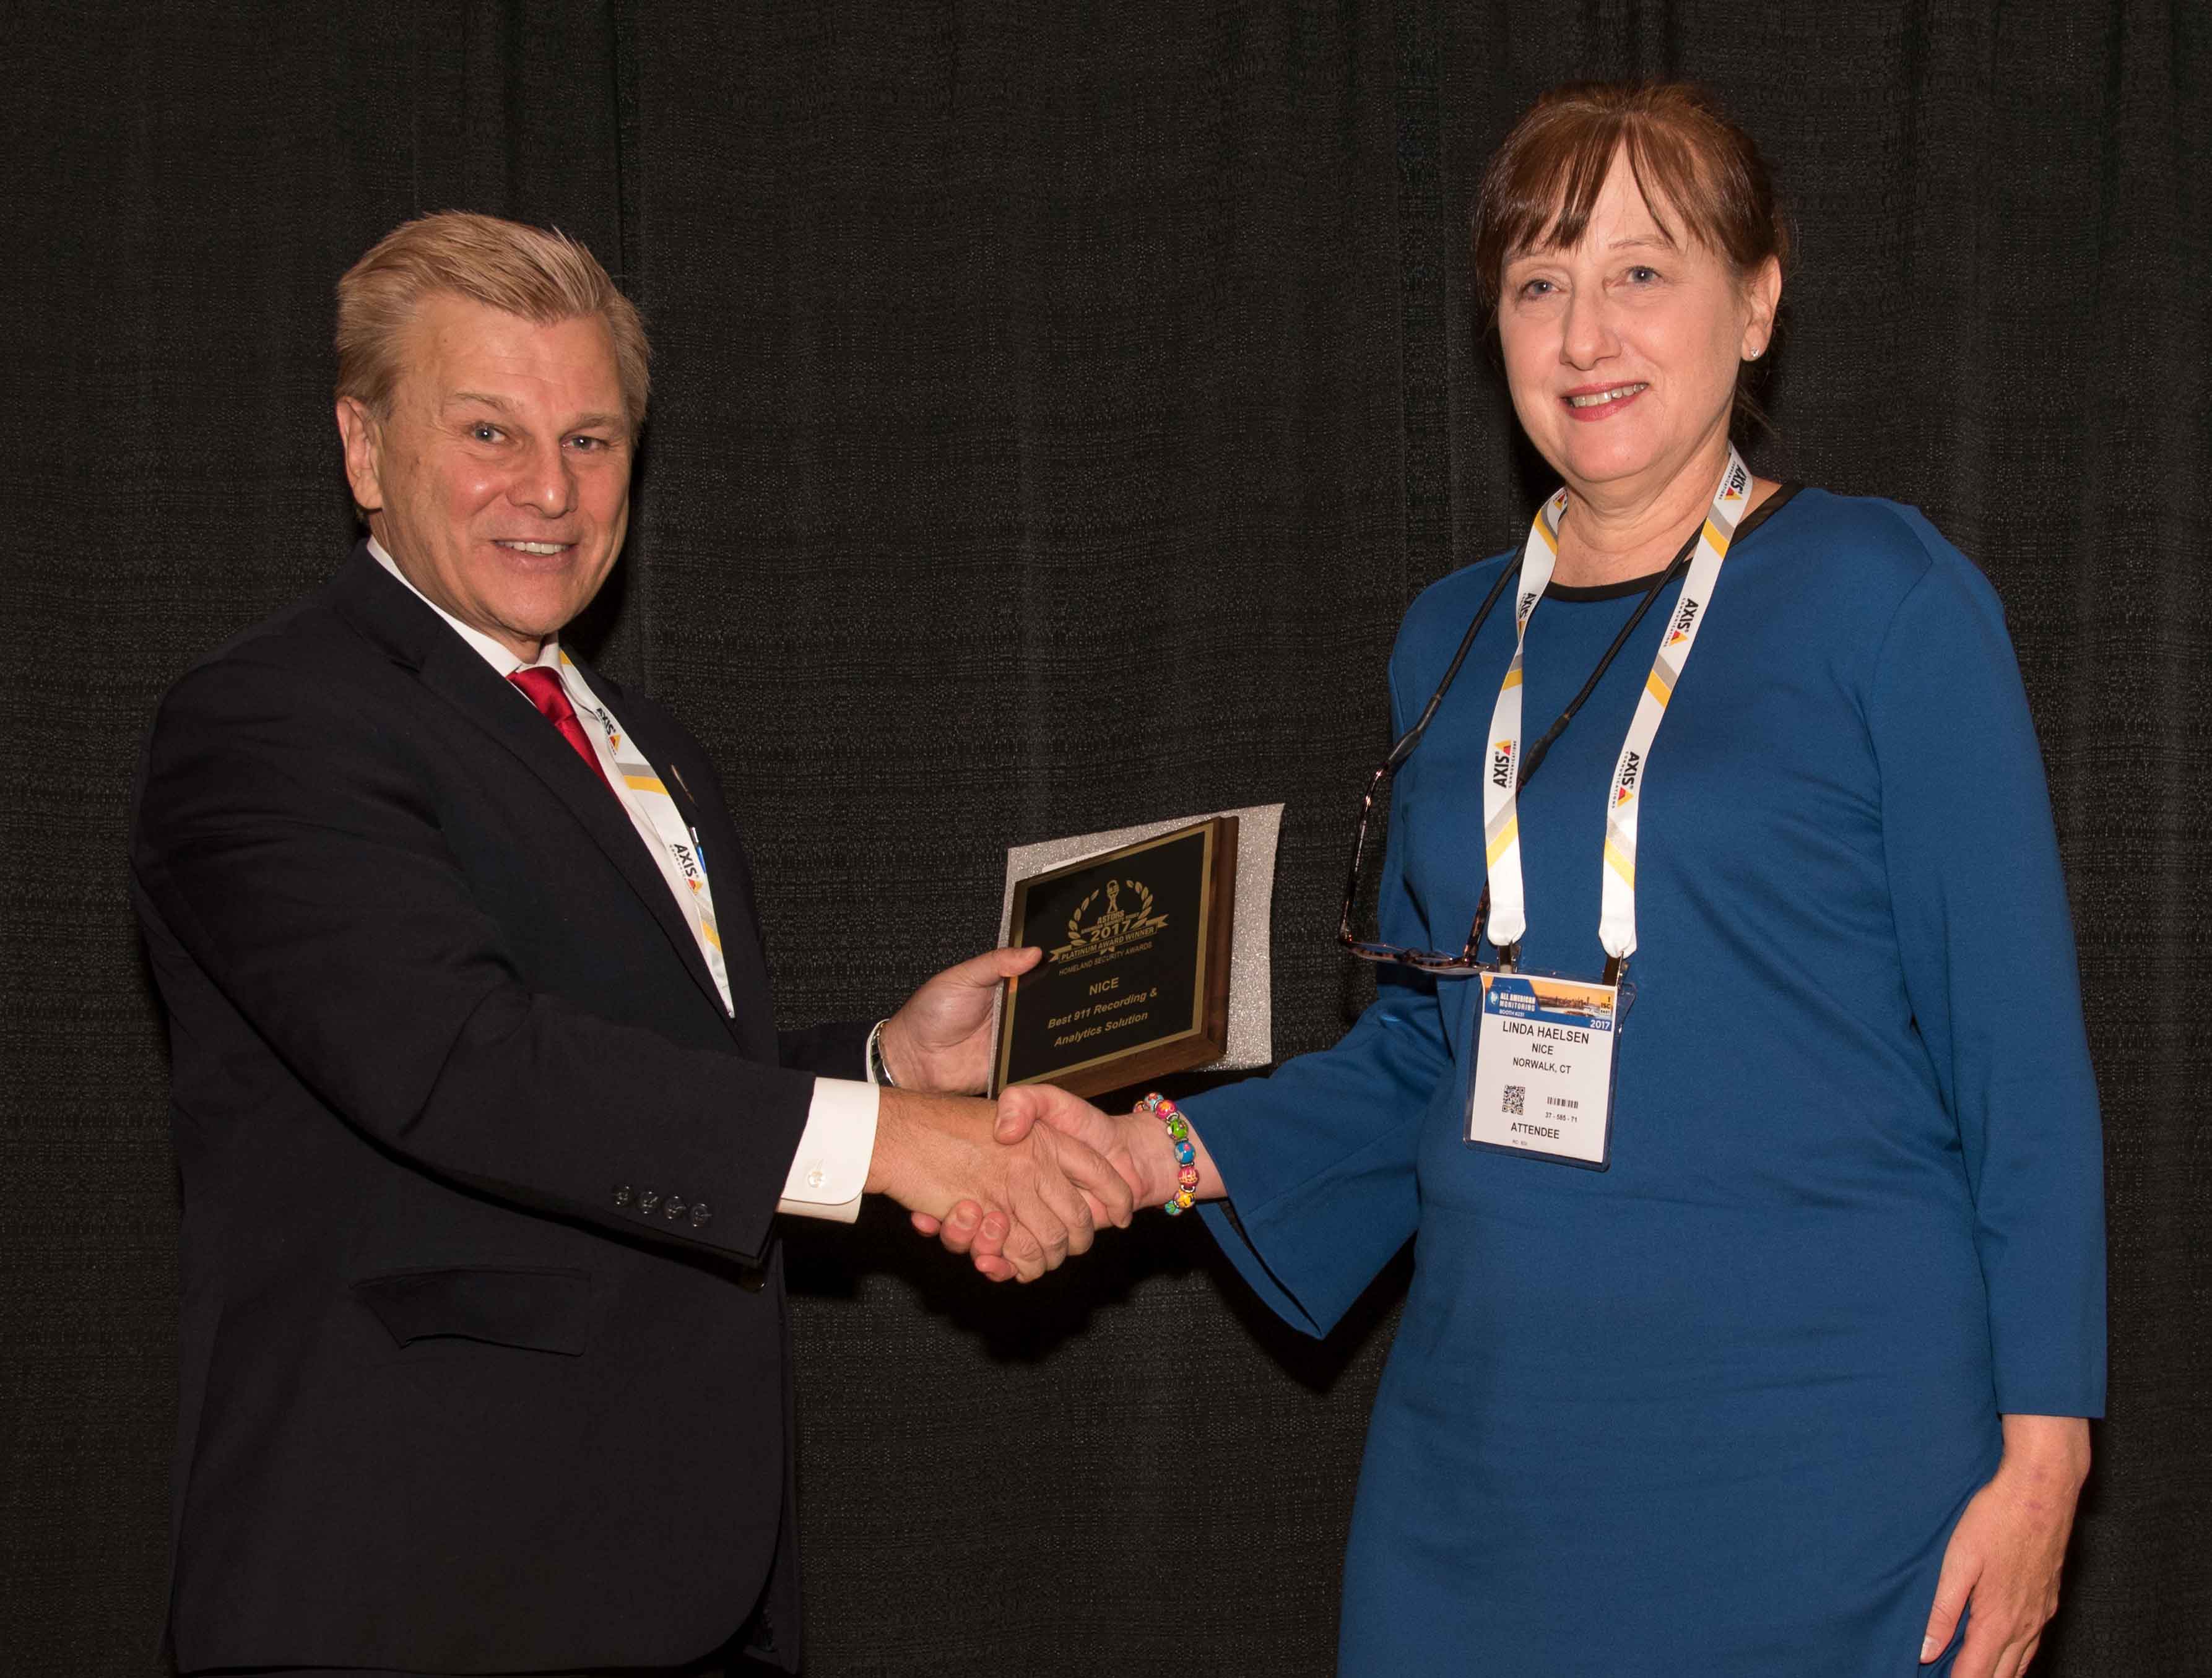 Linda Haelsen, NICE Marketing Communications Manager accepting the NICE 2017 ‘ASTORS’ Award at ISC East in New York City